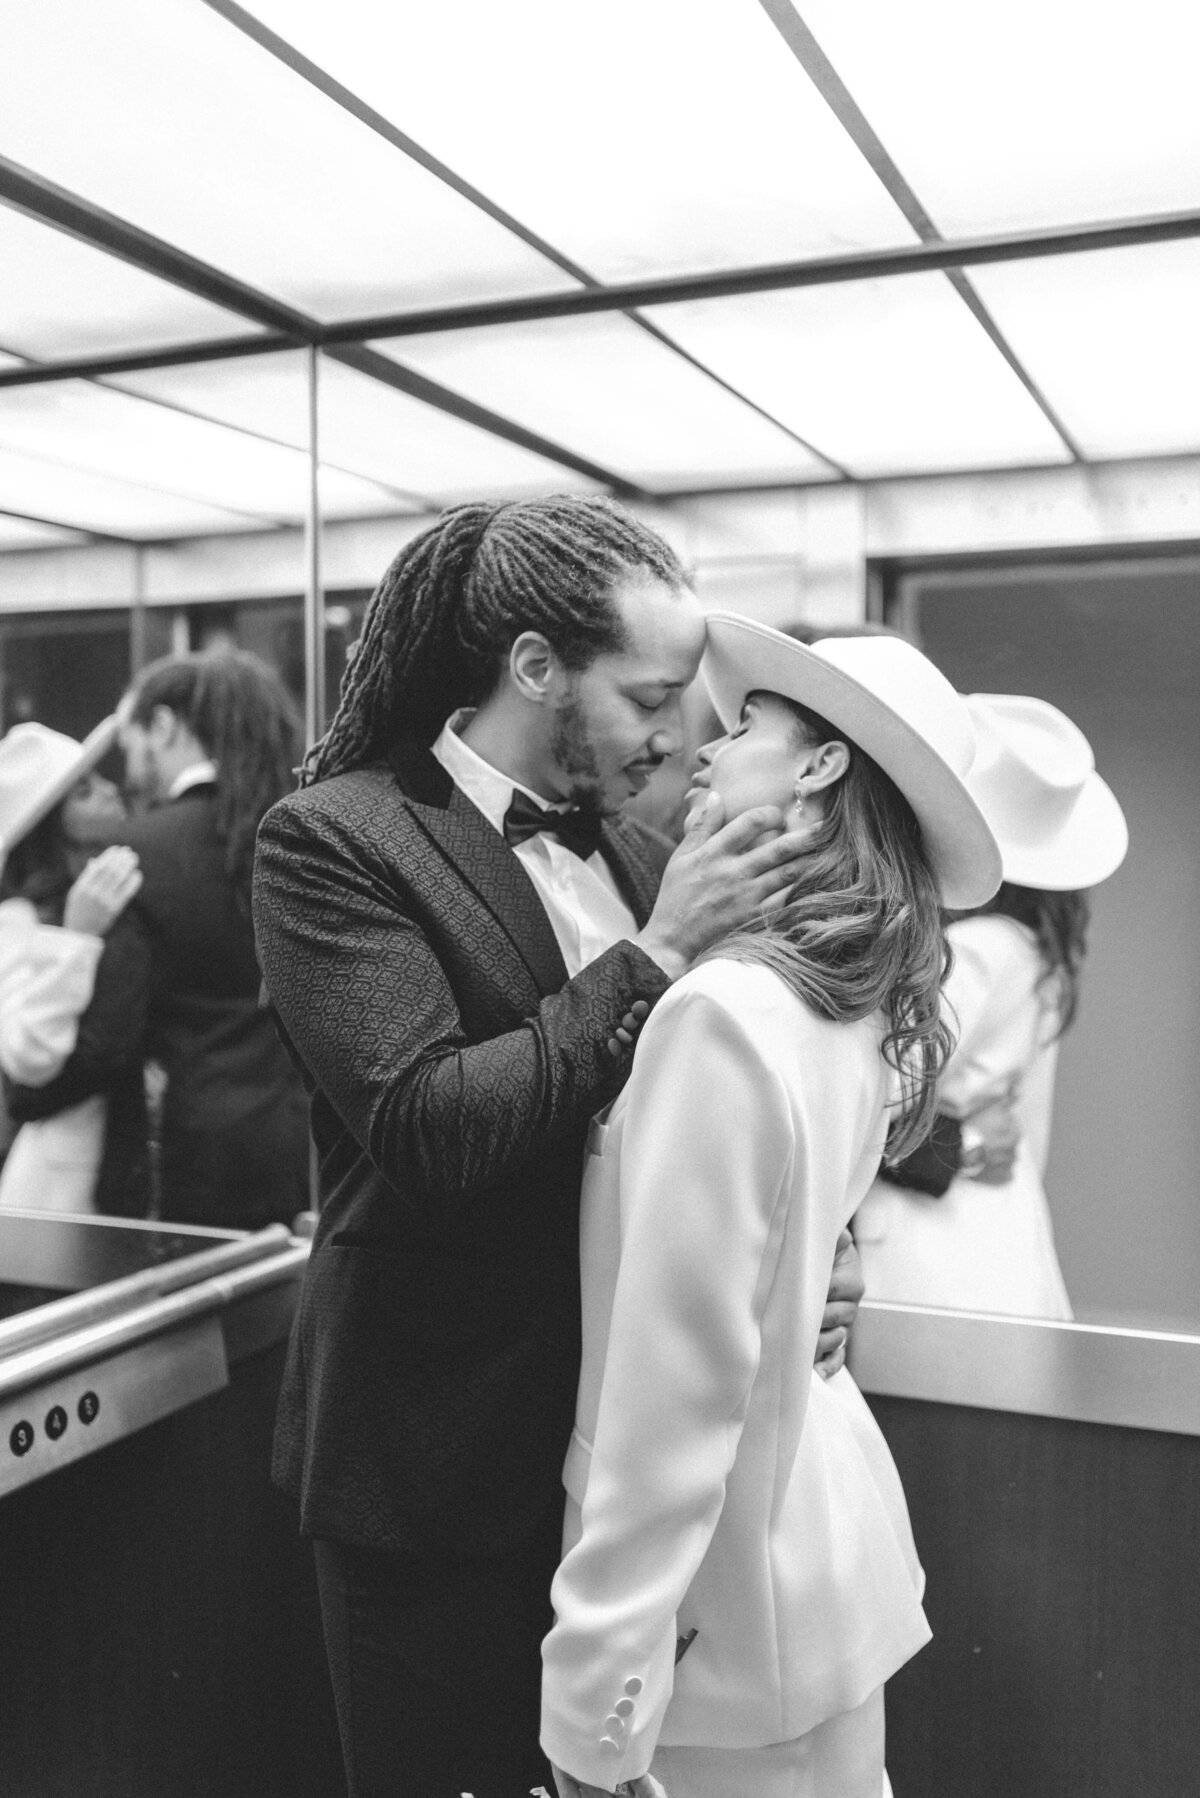 Shanie and tony kissing in lift after their elopement in London.